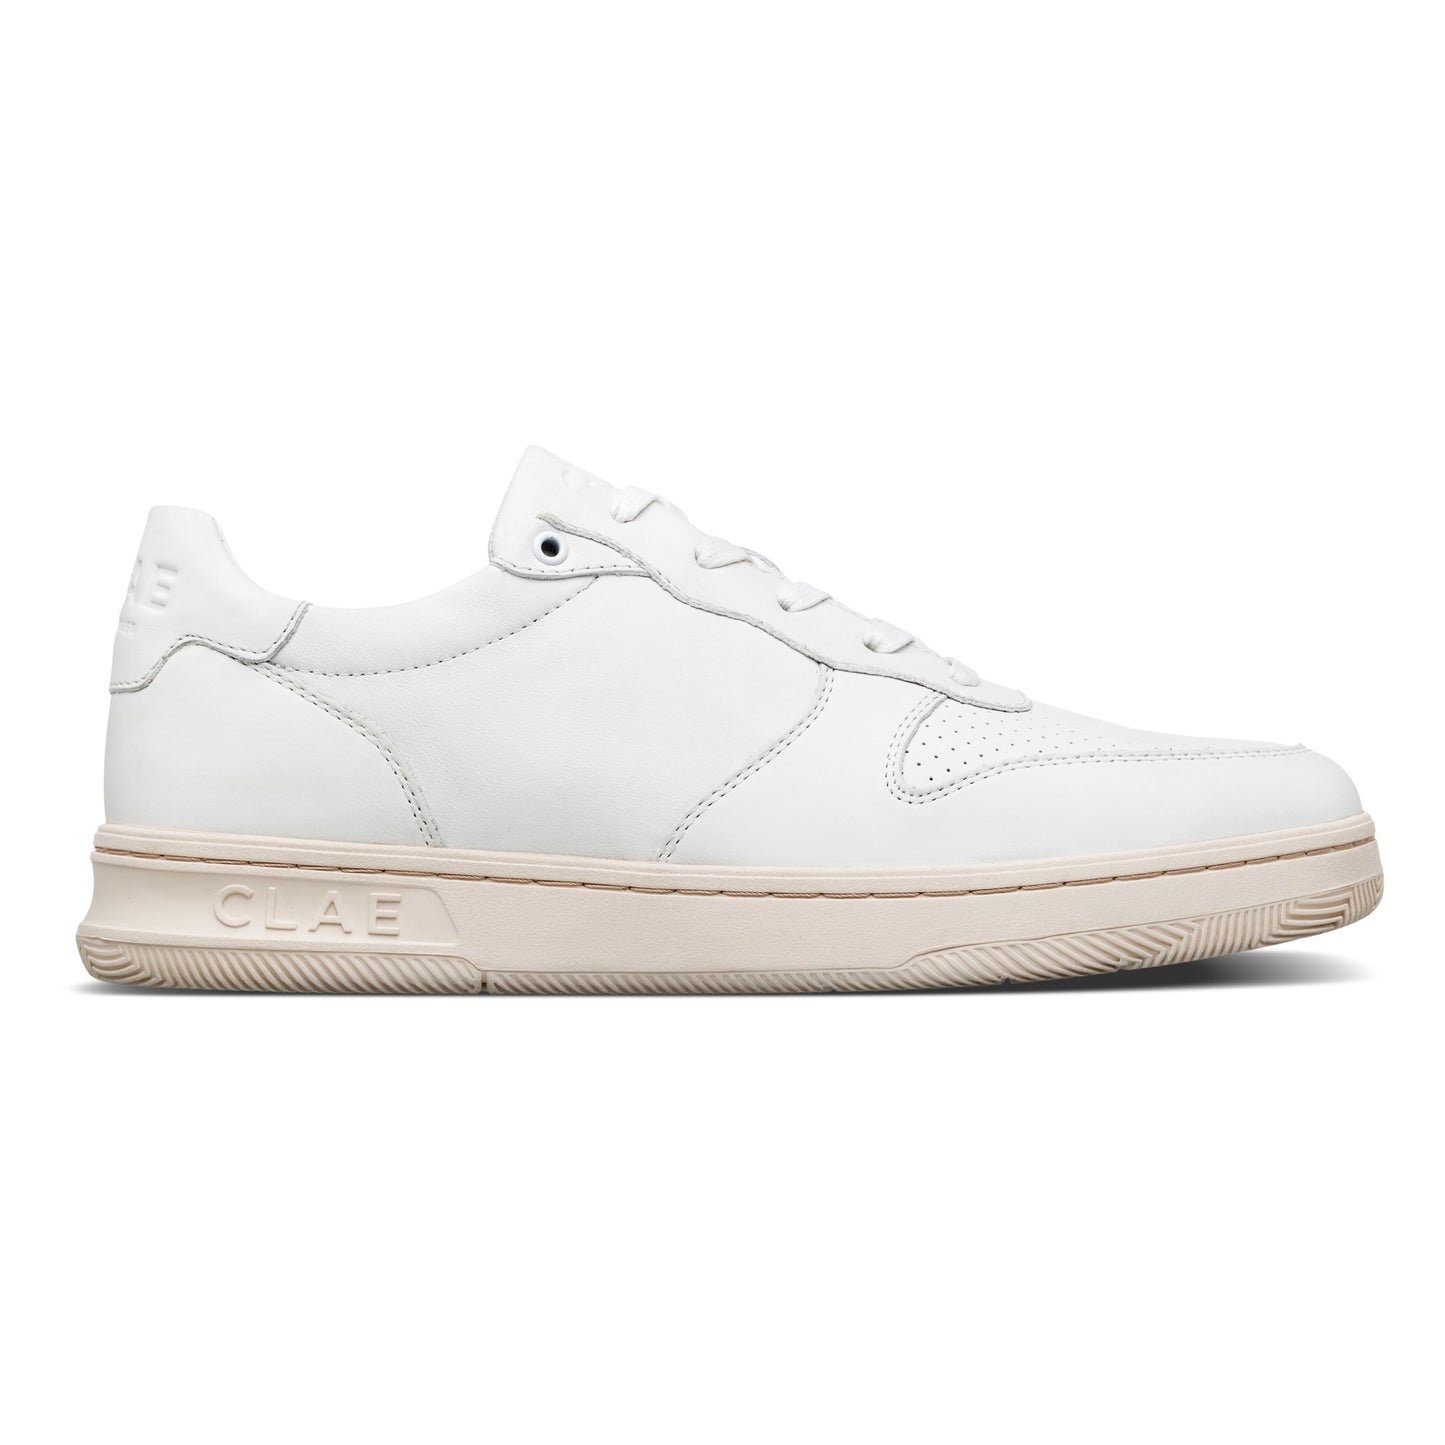 Sneakers CLAE - Malone White Leather